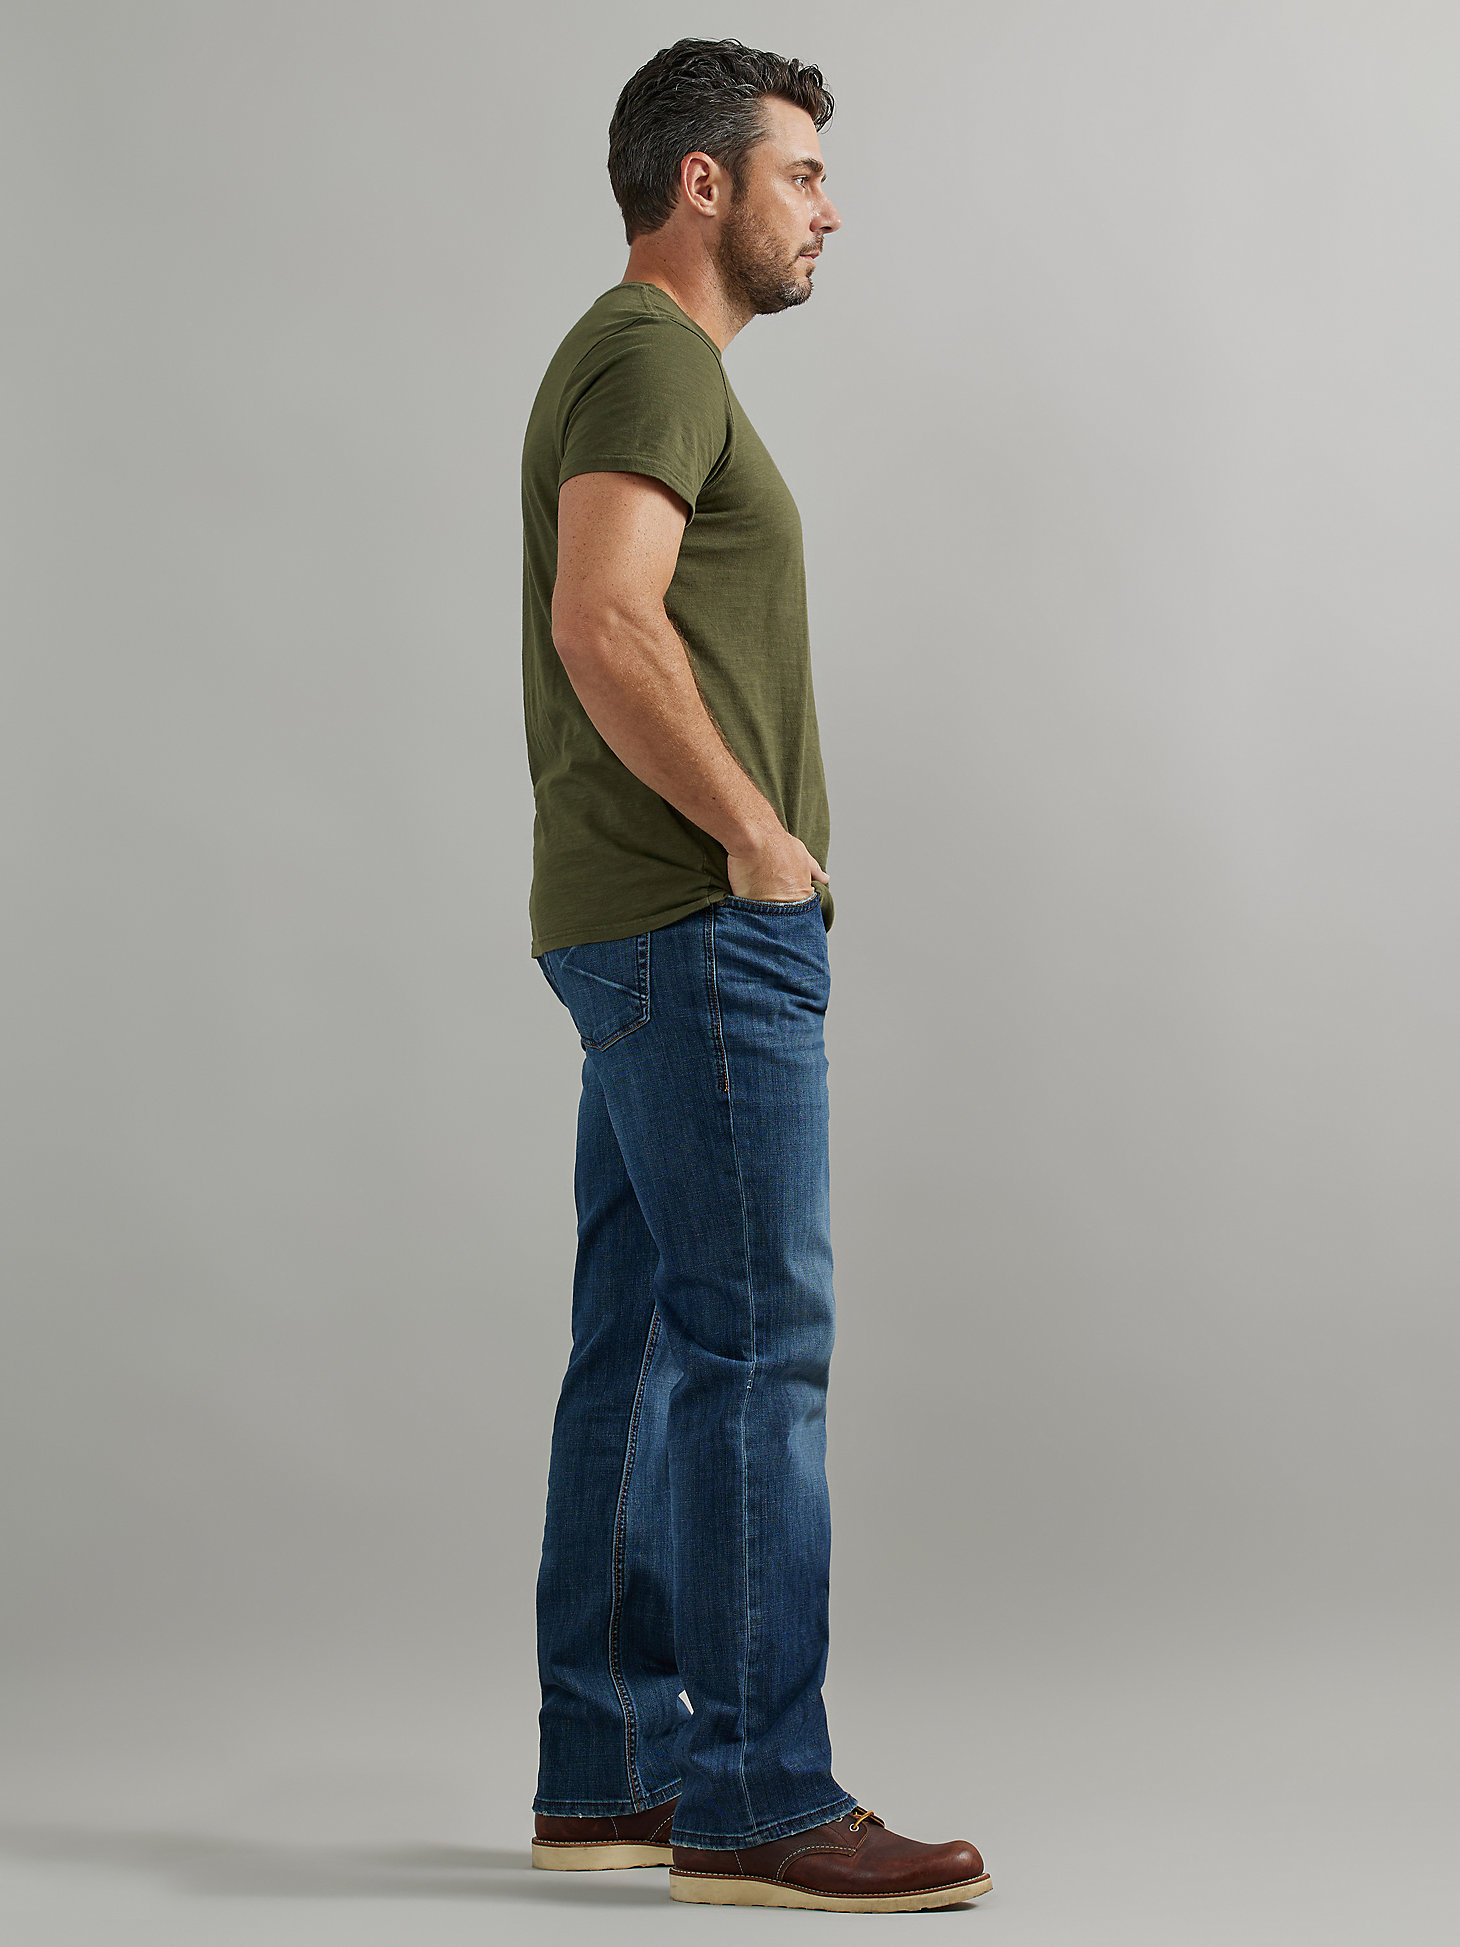 Men's Grady Relaxed Fit Straight Jean in Fade Out alternative view 7